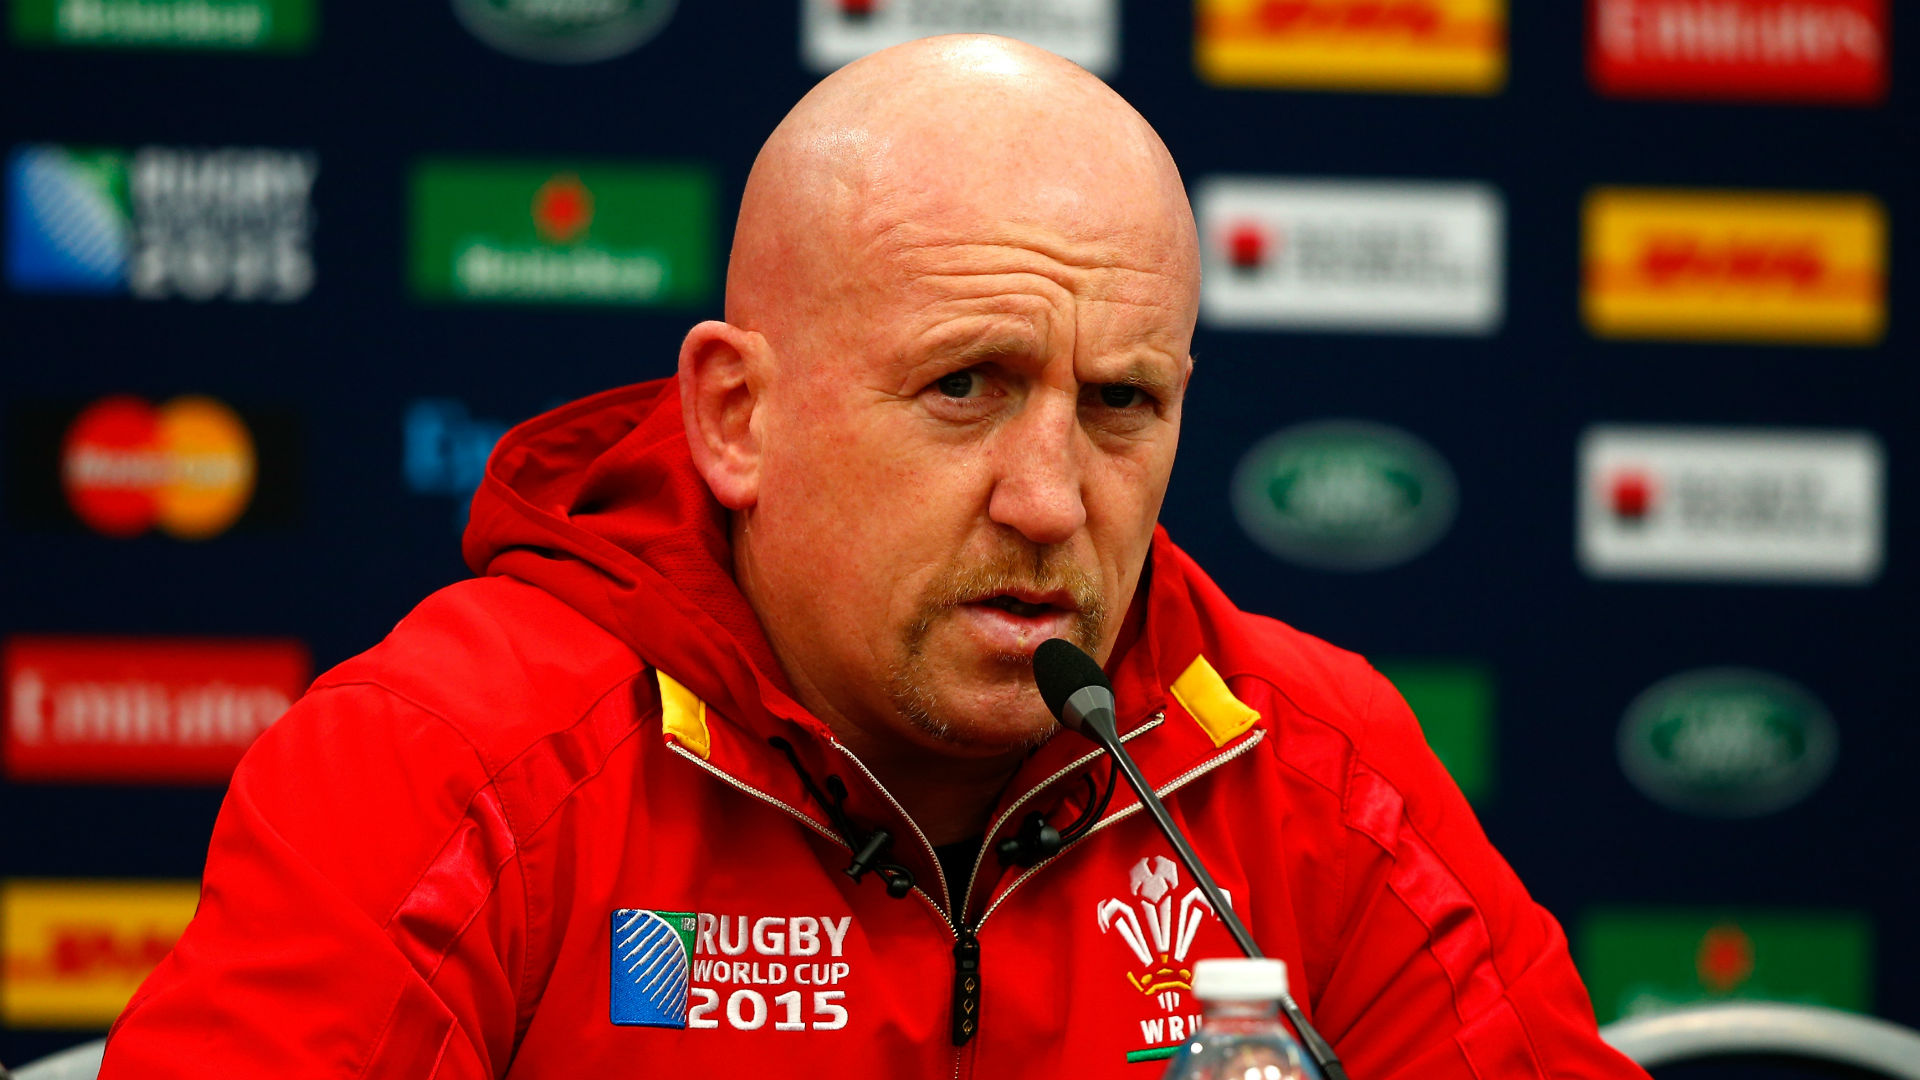 Wales coach Shaun Edwards has urged focus on this year's World Cup and not his next career move following comments by Wayne Pivac.